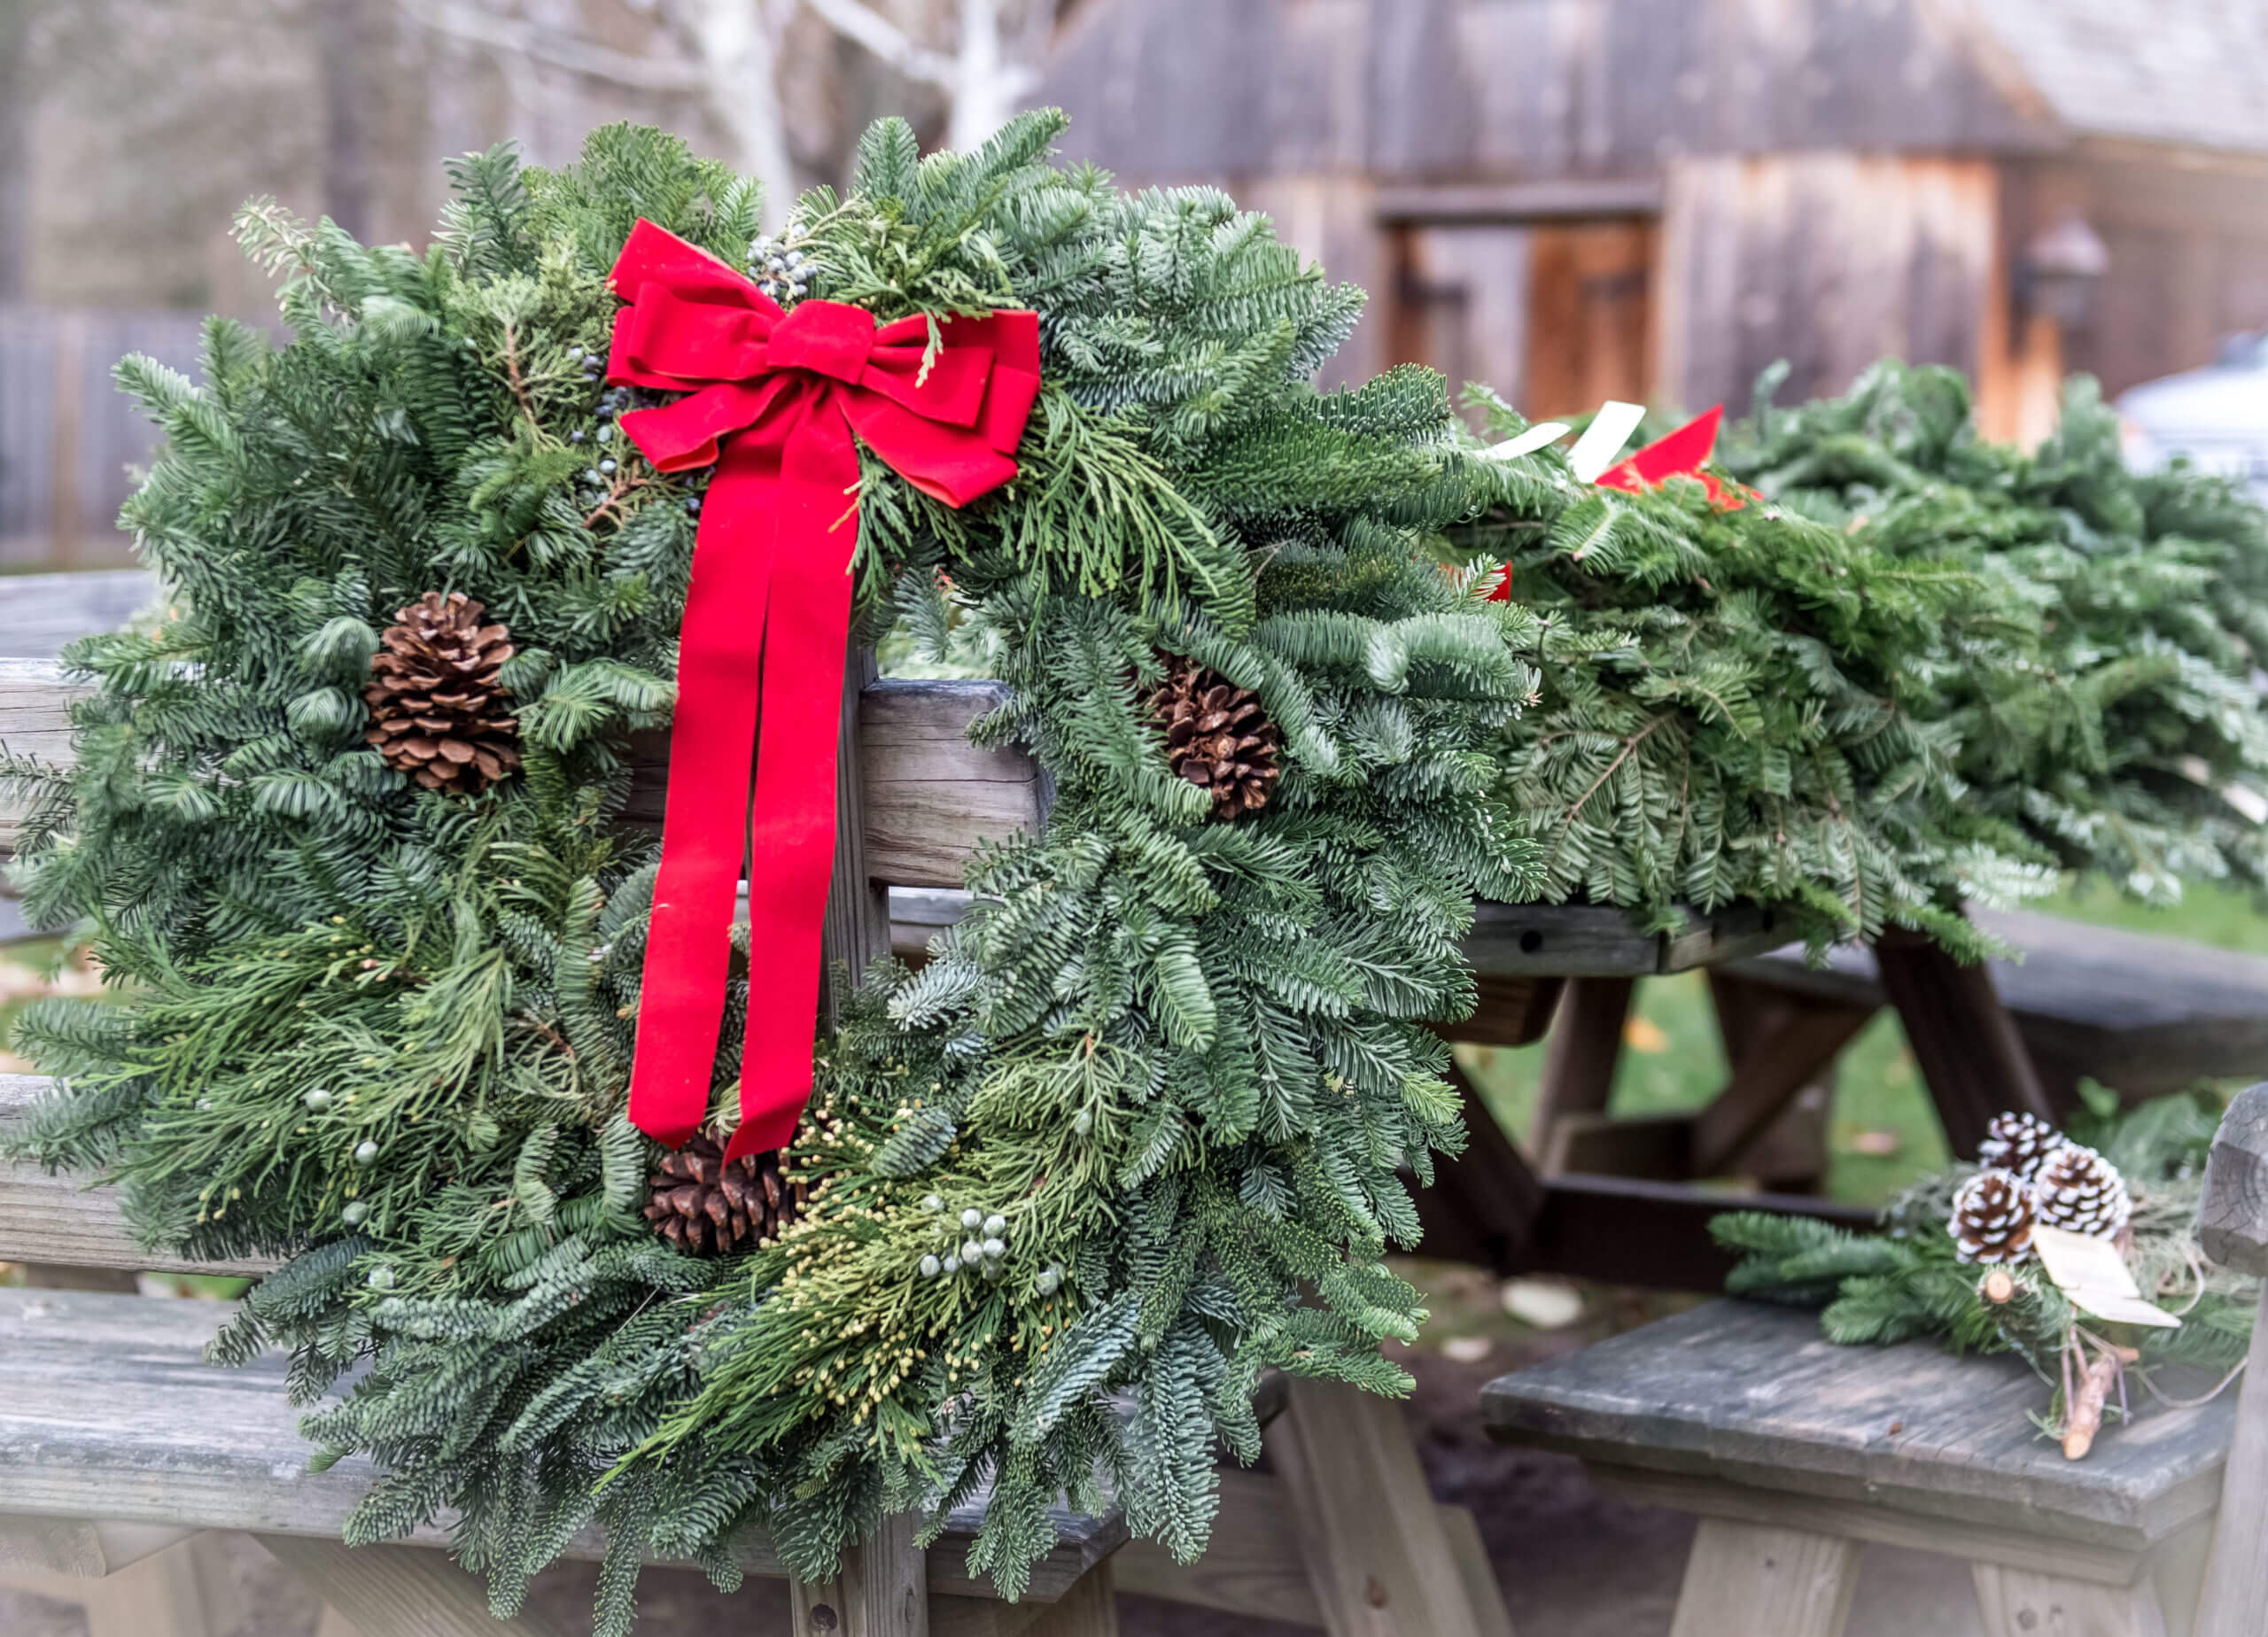 Several evergreen Christmas wreaths are on a picnic table.